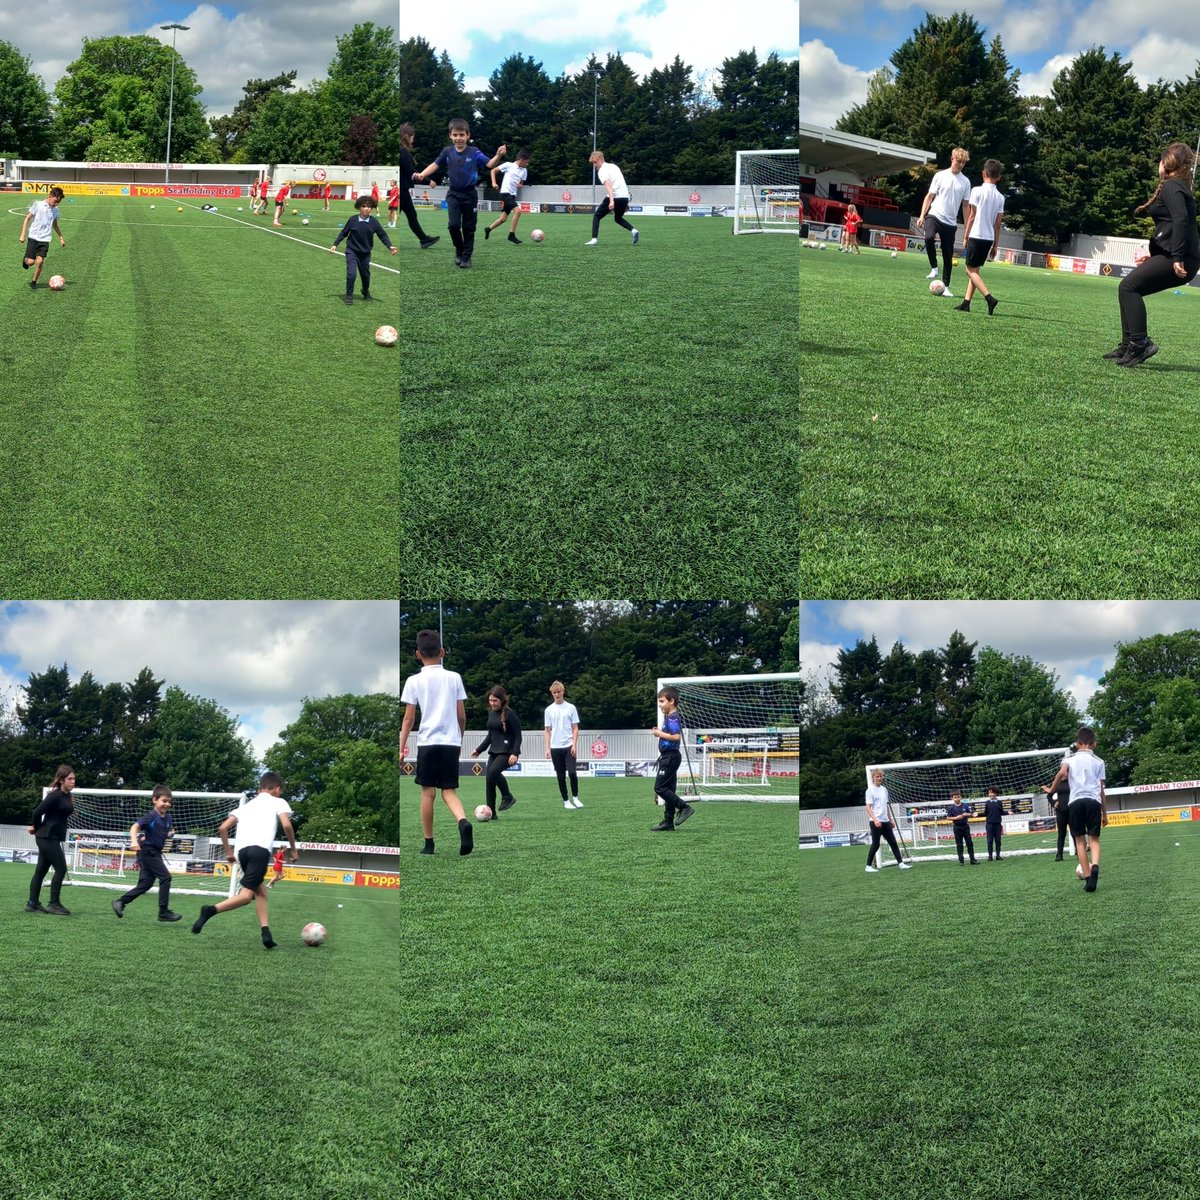 A great afternoon @ChathamTownFC today.As it was our last session of the term, the children thoroughly enjoyed a challenging match against staff today ⚽️ 🥅 #Teamwork #ThisisAP #Football